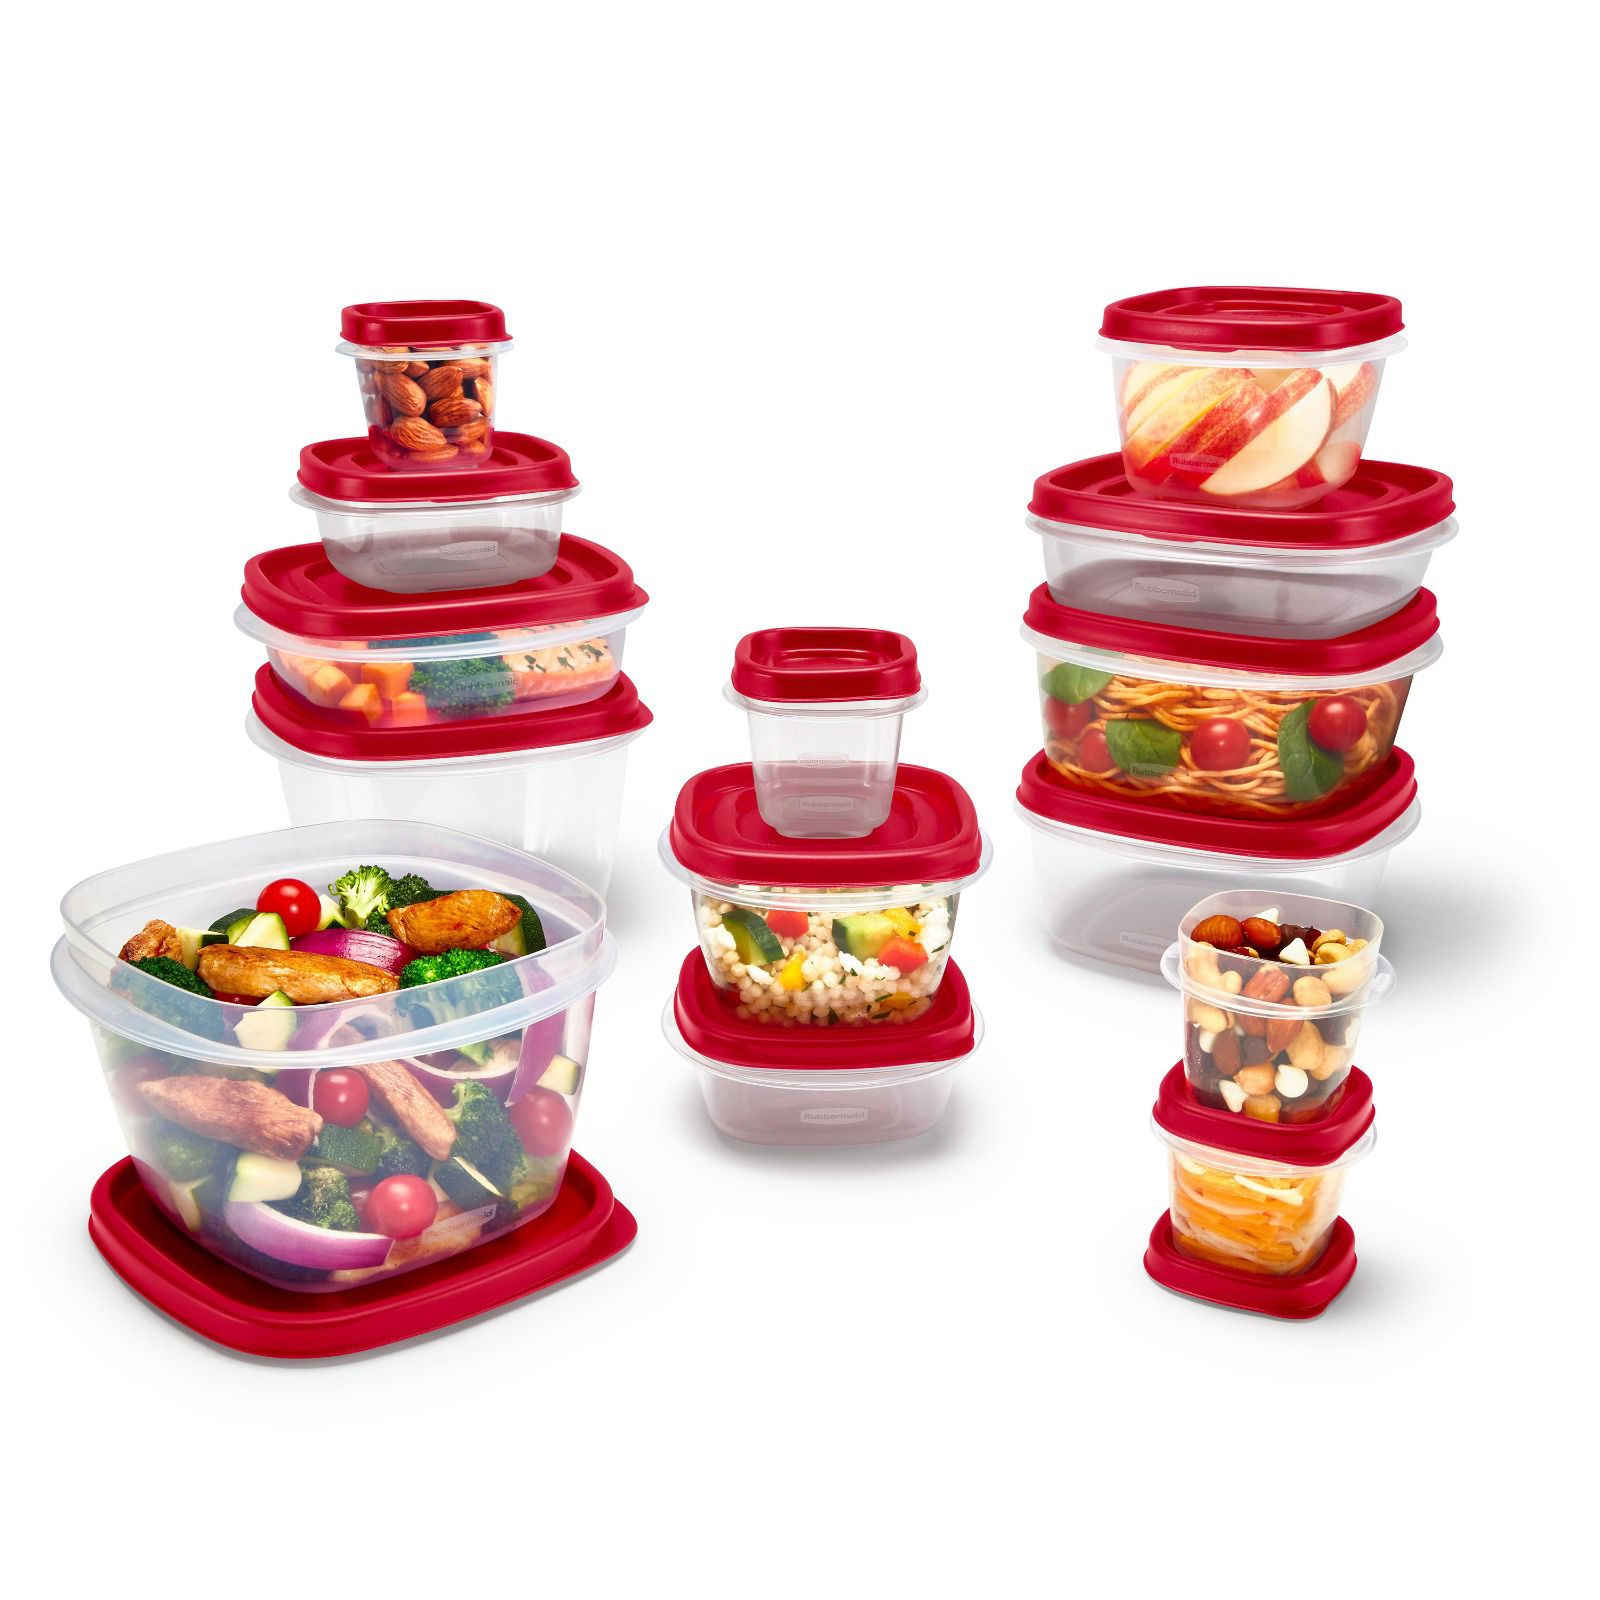 Rubbermaid Easy Find Vented Lids Food Storage Containers, 28-Piece Set Bonus, Racer Red